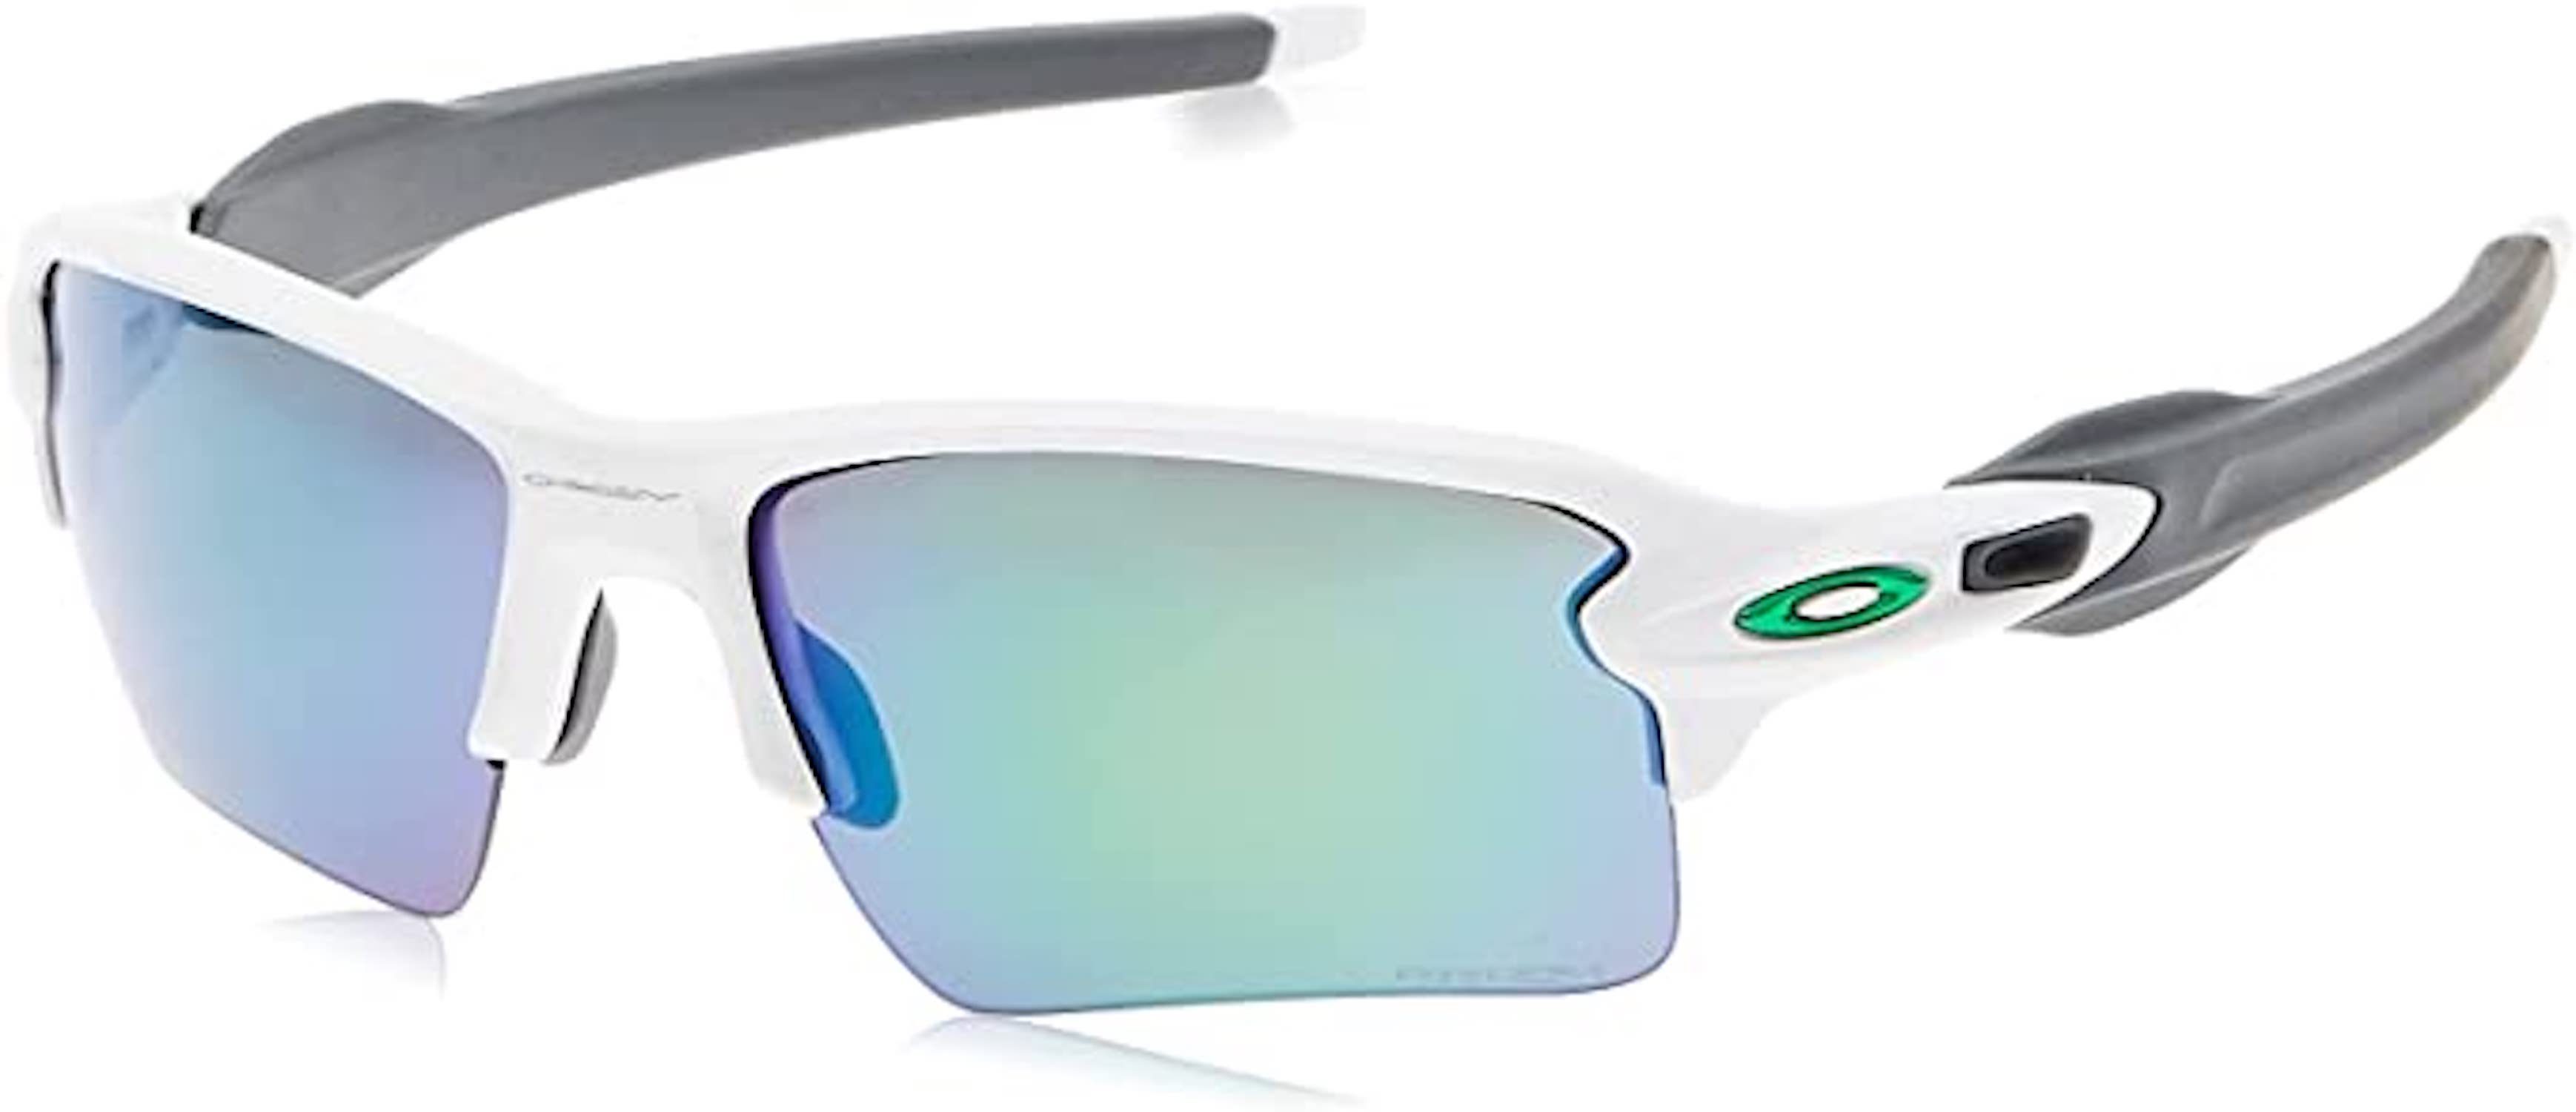 How To Choose Running Sunglasses | Safety Gear Pro